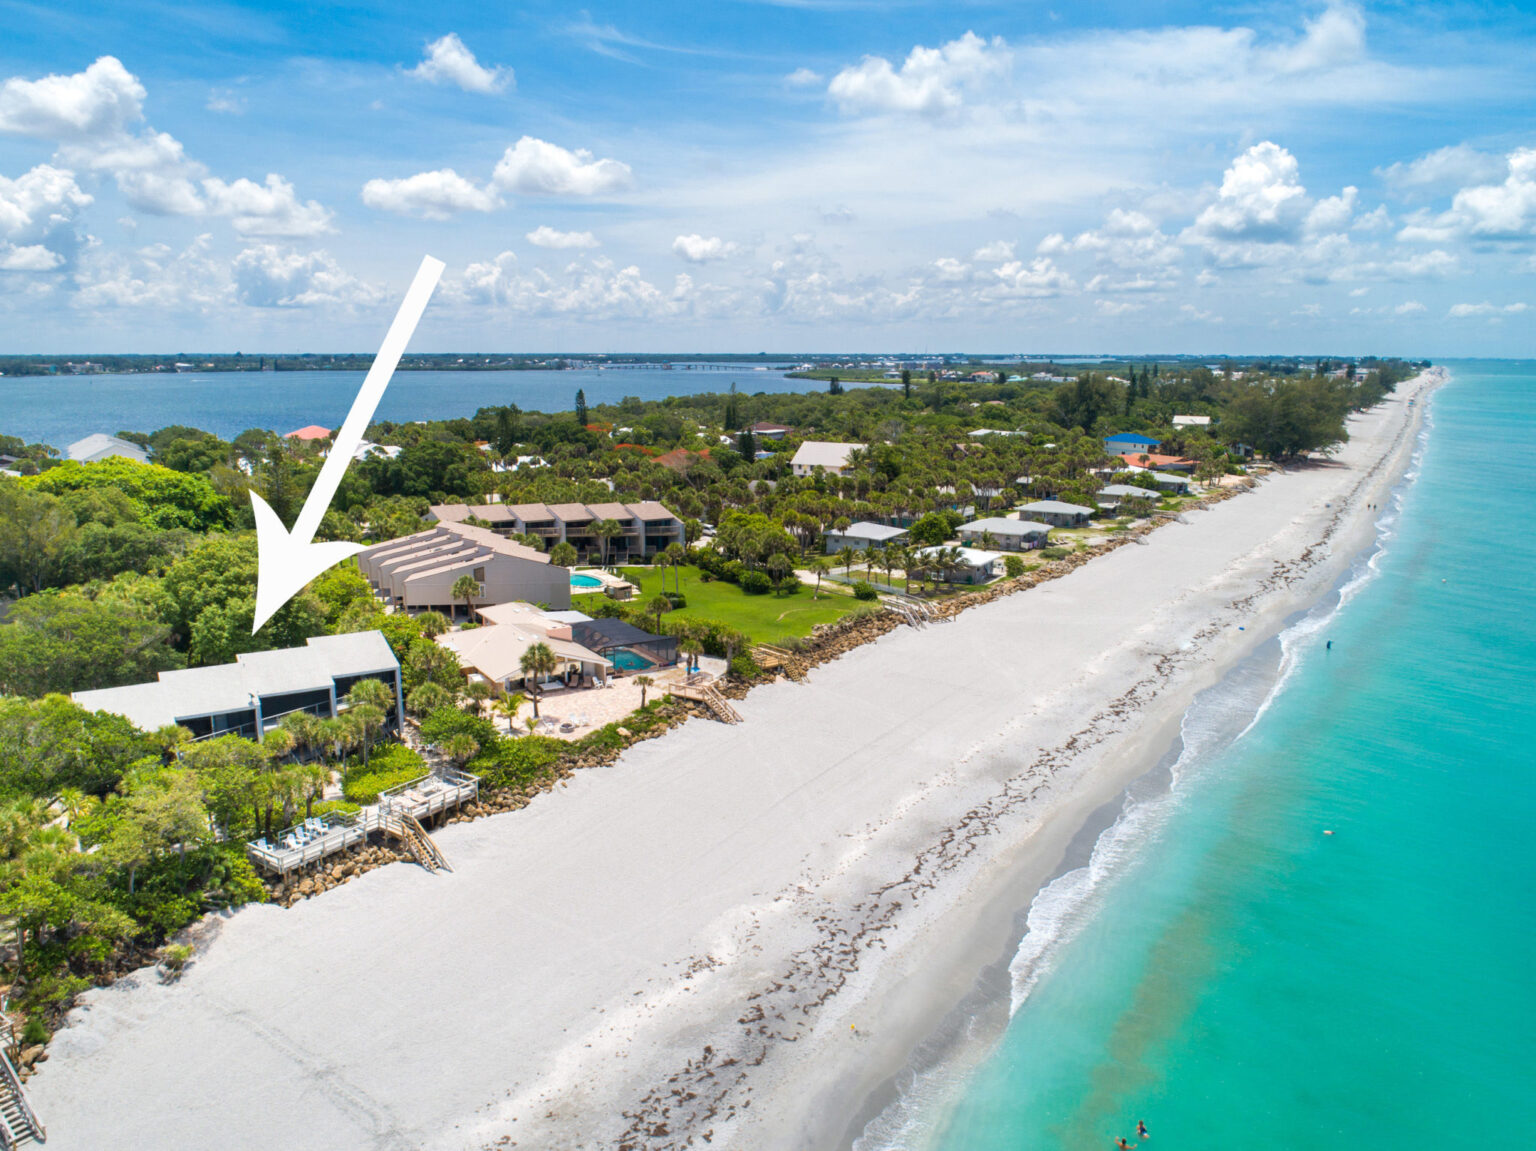 aerial view looking south on manasota key marina with a marker showing location of Banyan Bluff condo building right next to the beach